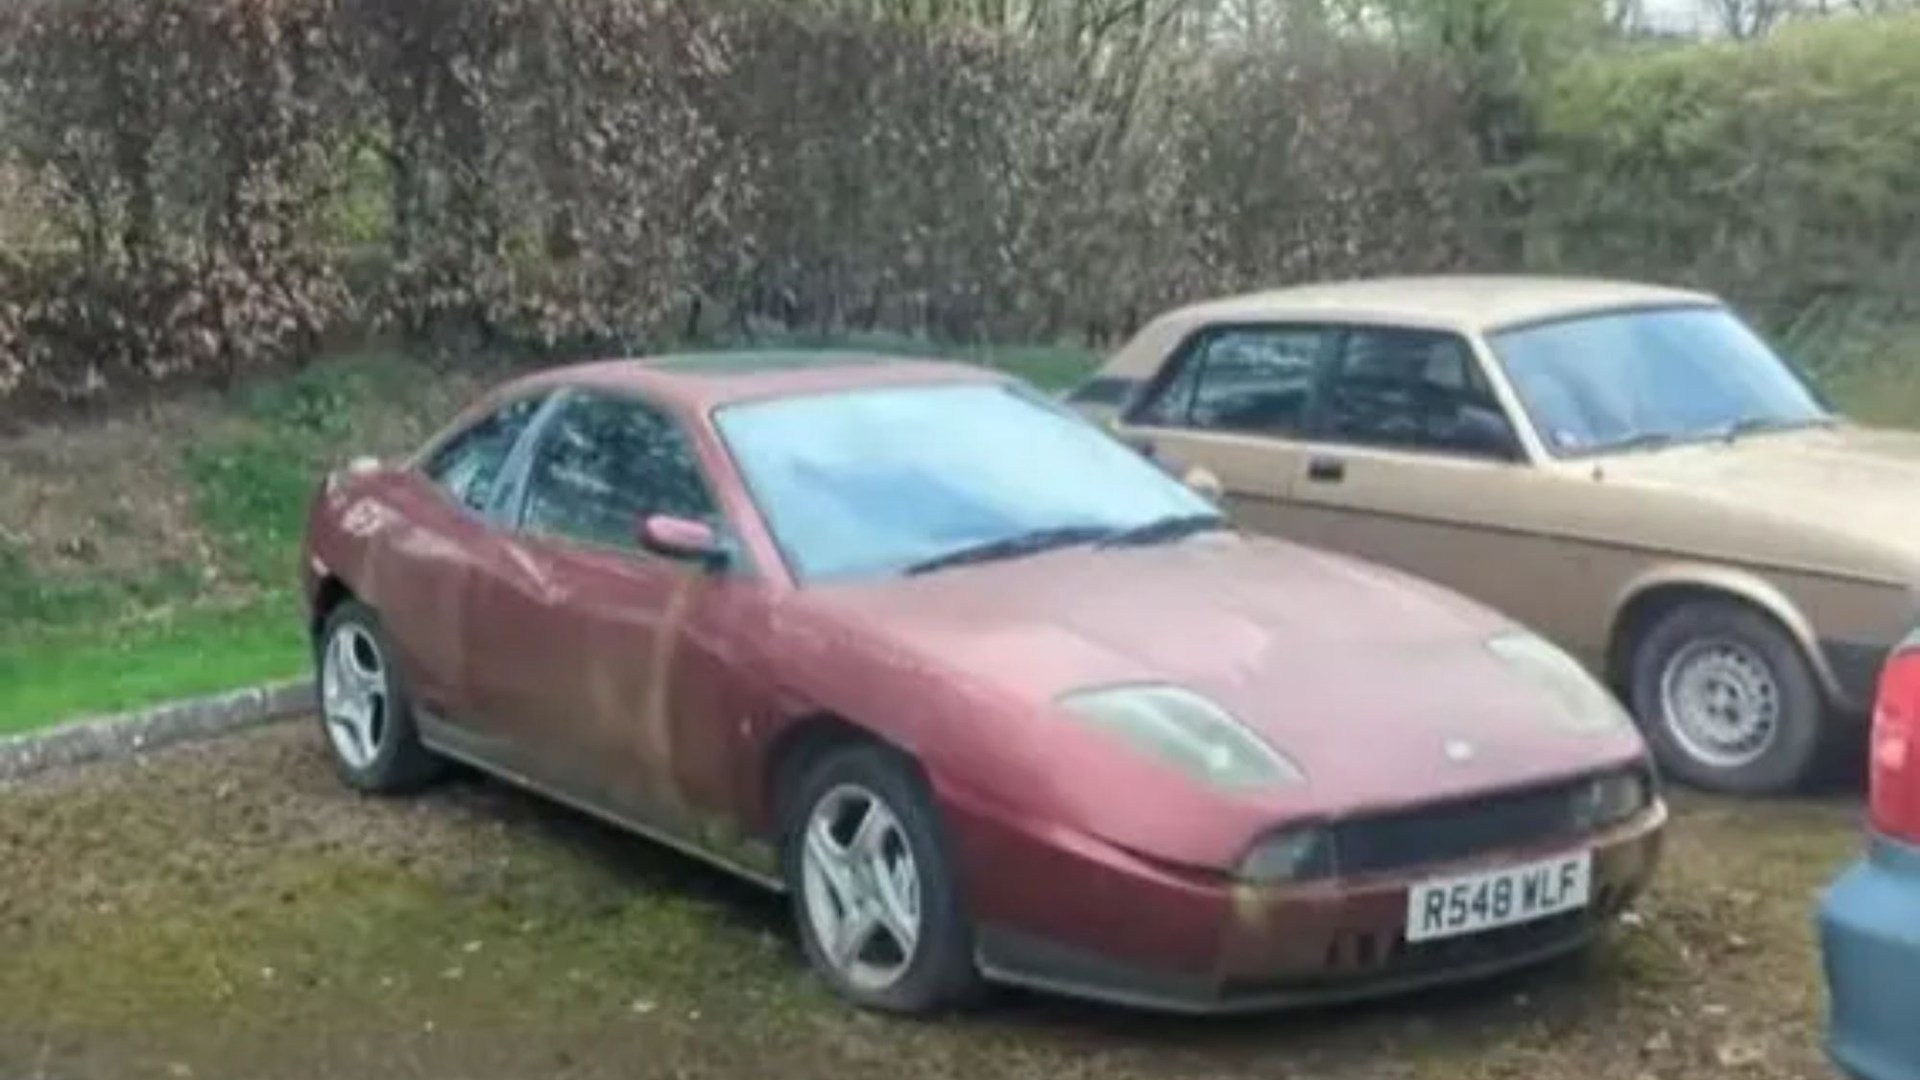 Inside mouldy Coupe car salesman swears could make him 1000s as it’s ‘solid as a rock’ [Video]